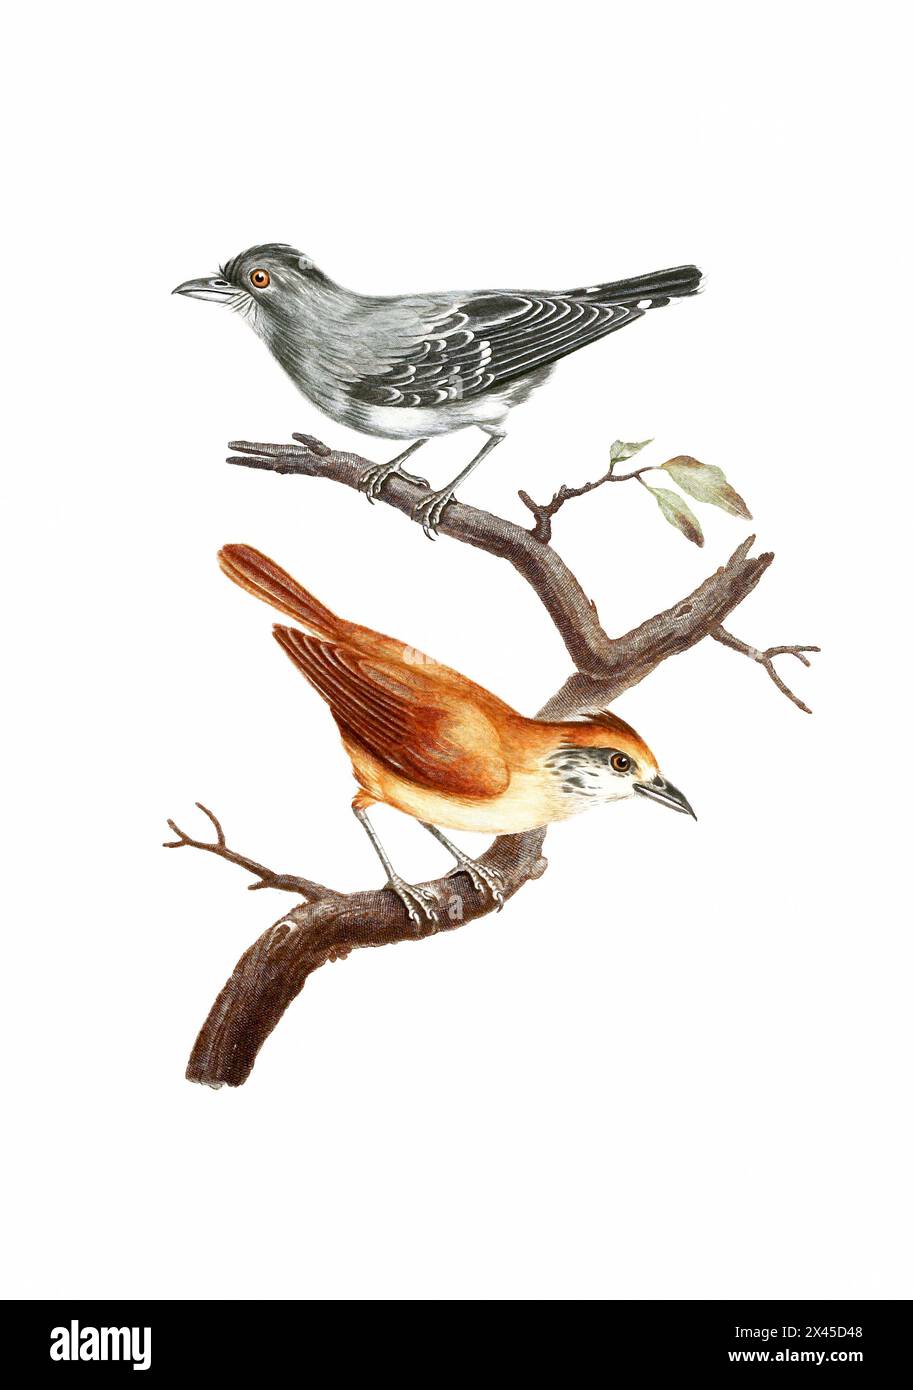 Song Birds. Vintage inspired bird art. Digital Watercolor painting on a soft textured white background. Stock Photo